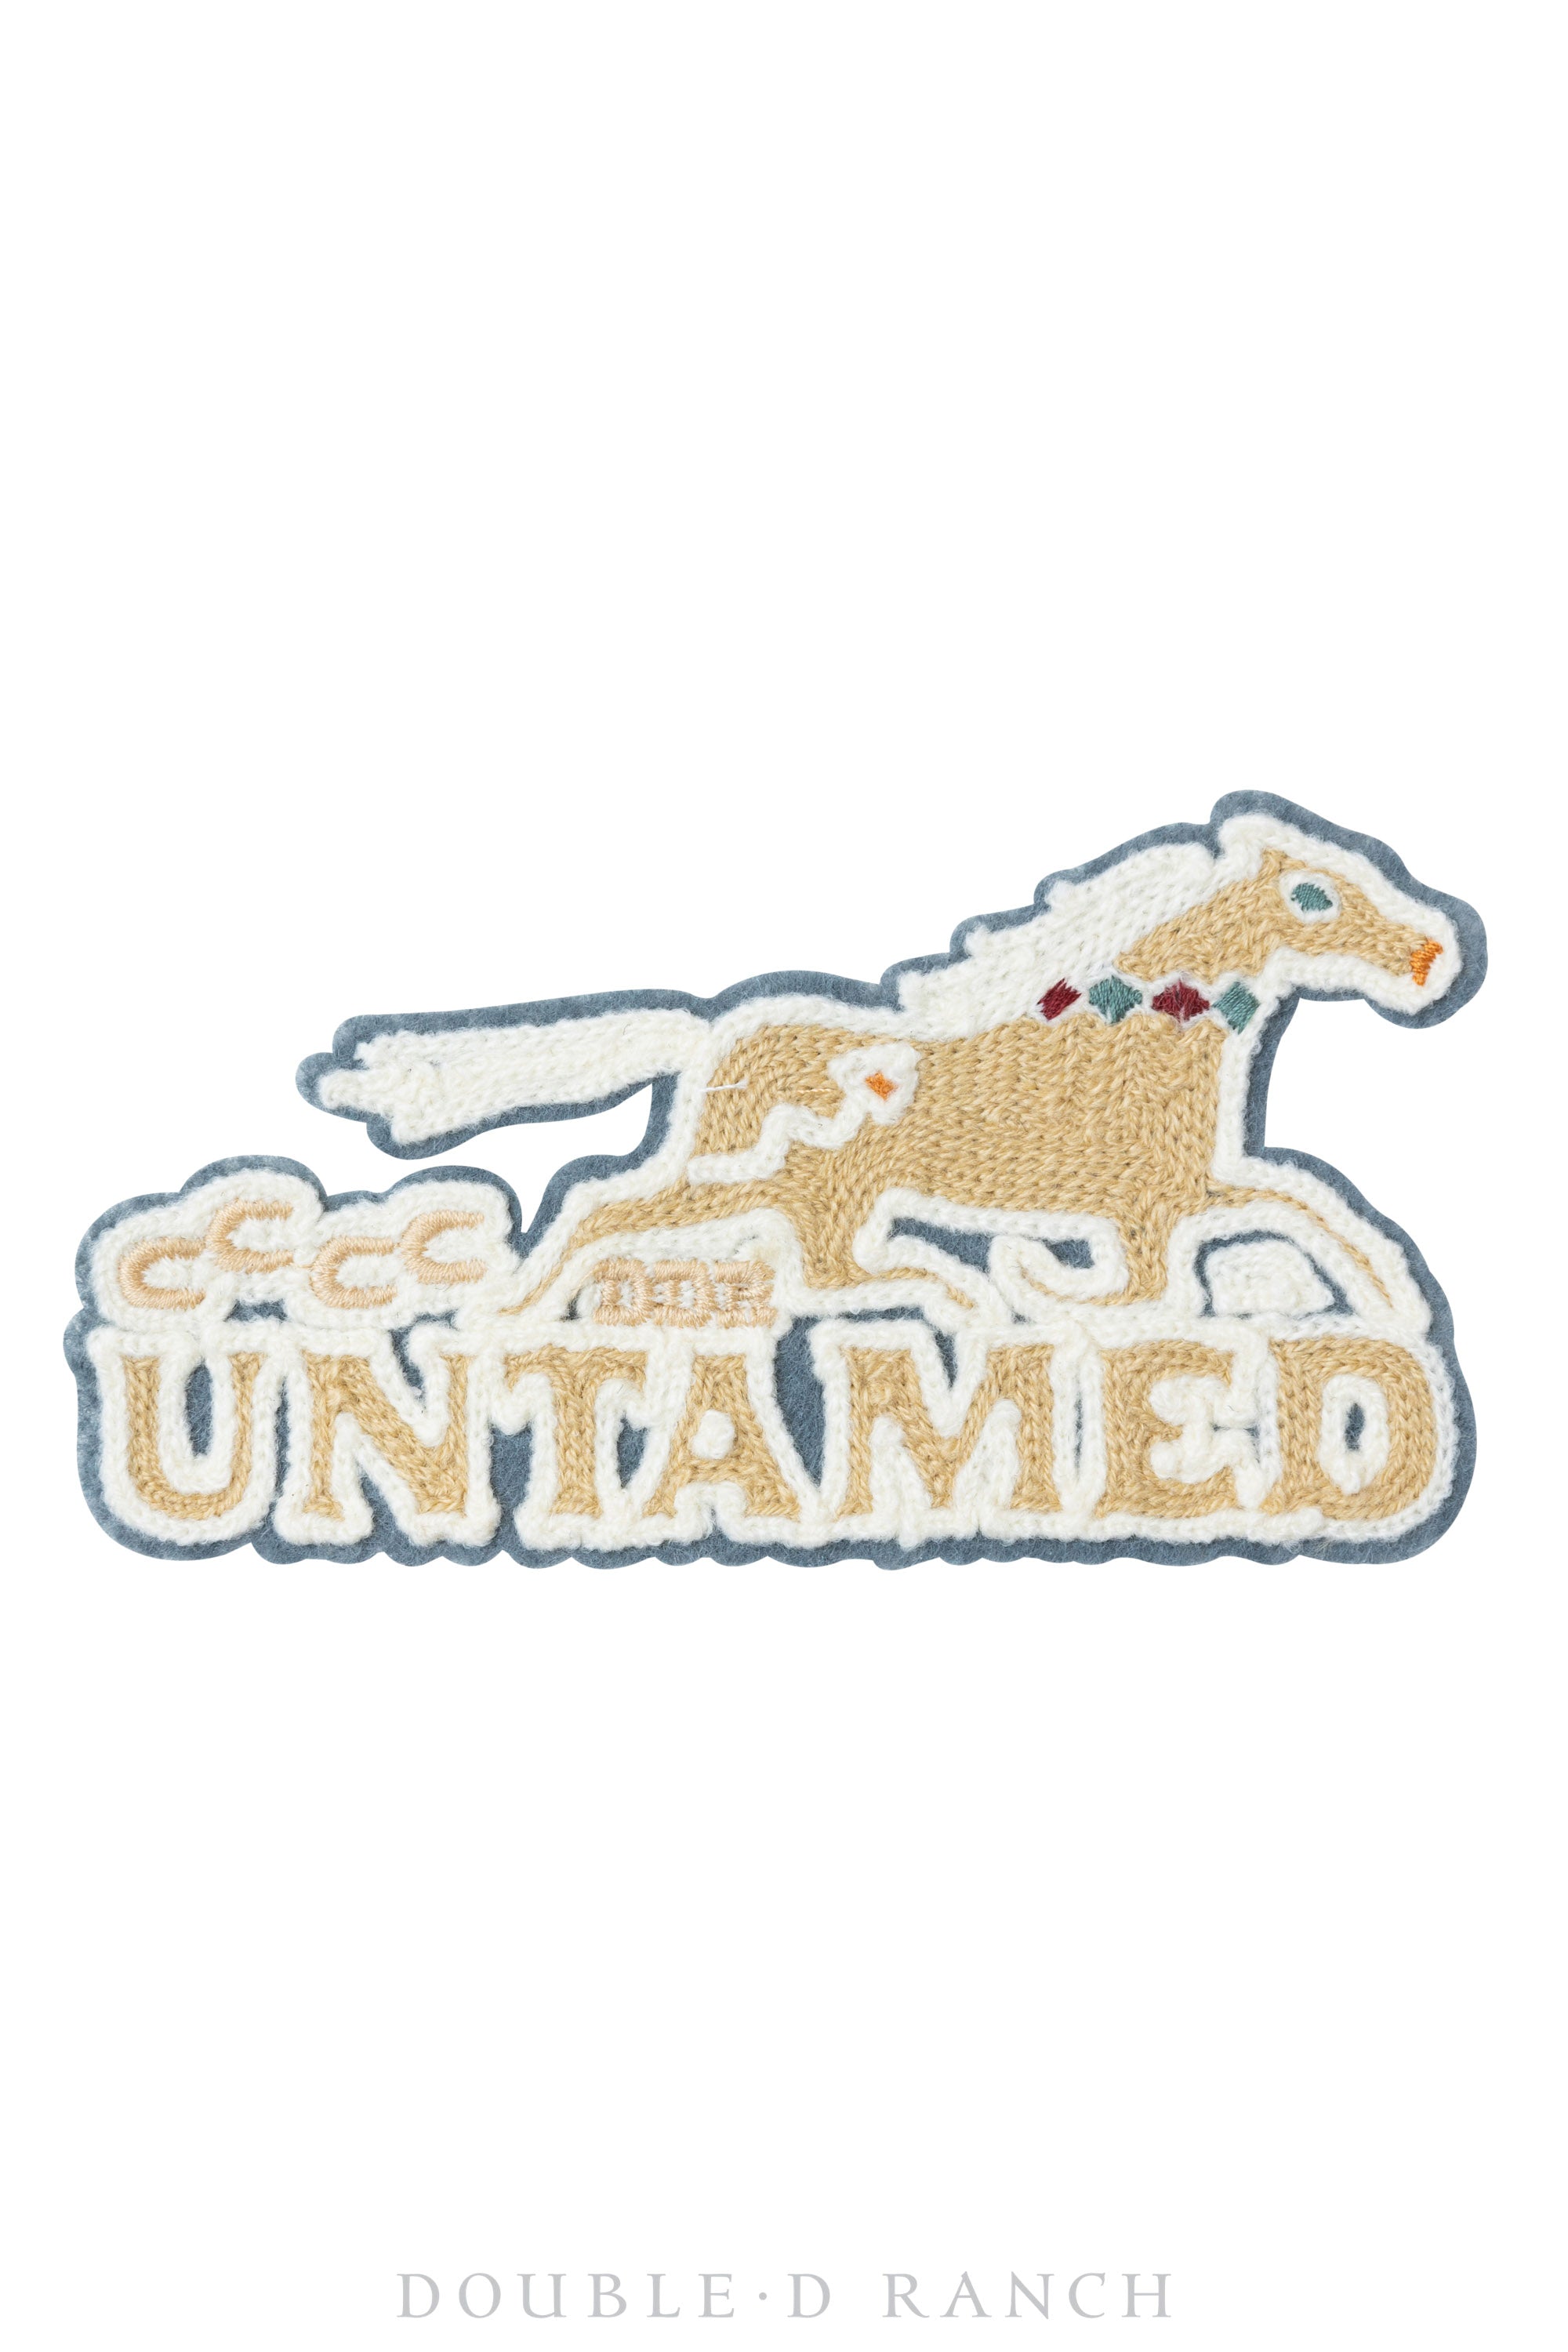 Miscellaneous, Patch, Untamed, 1044